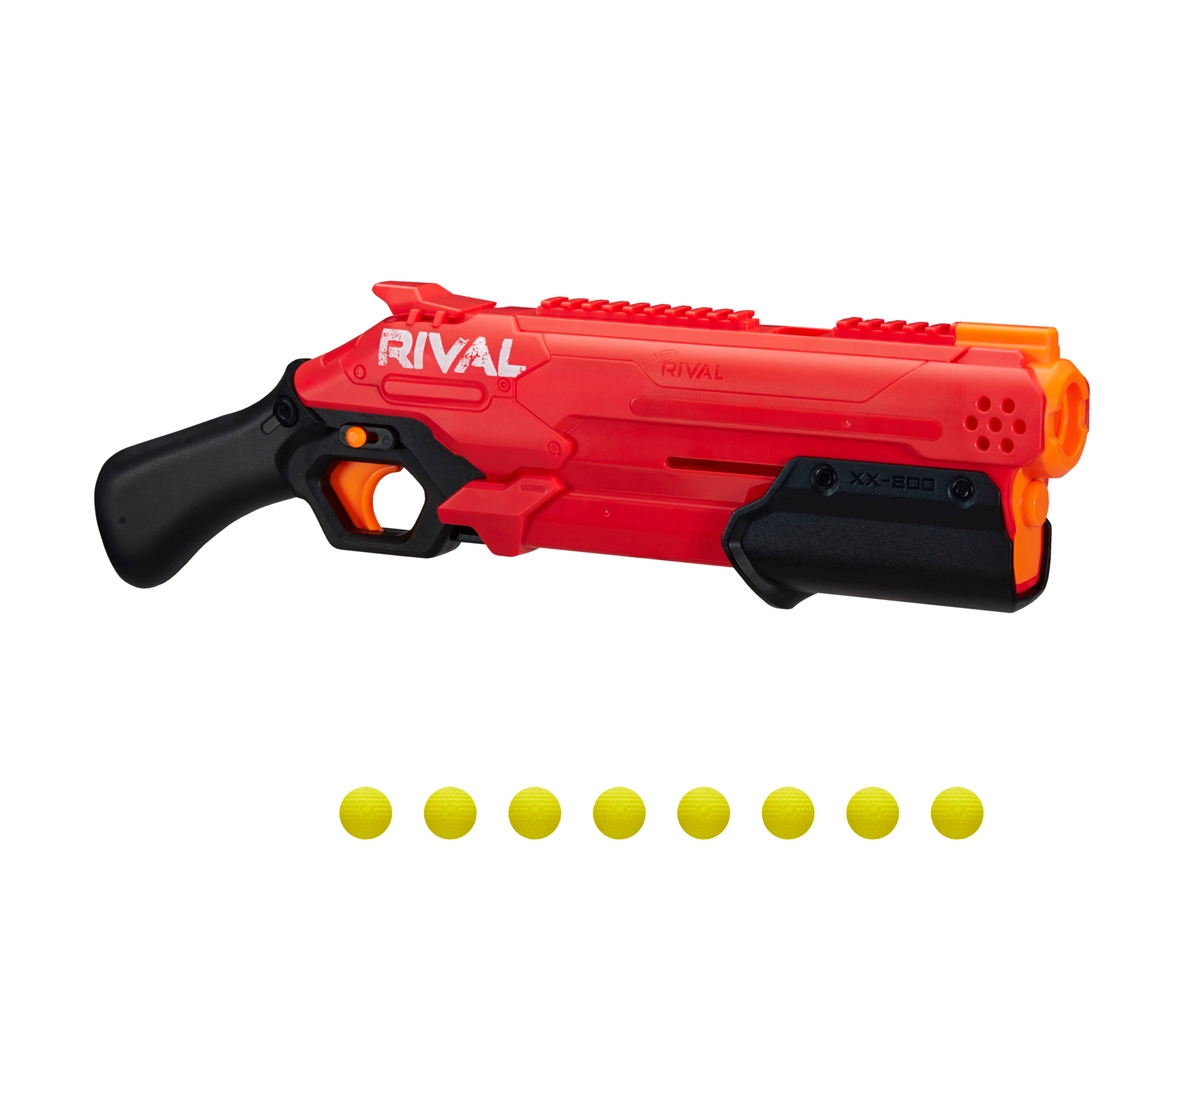 Nerf | Nerf Rival Takedown XX 800 Blaster Pump Action Breech Load for Kids 14Y+, Multicolour